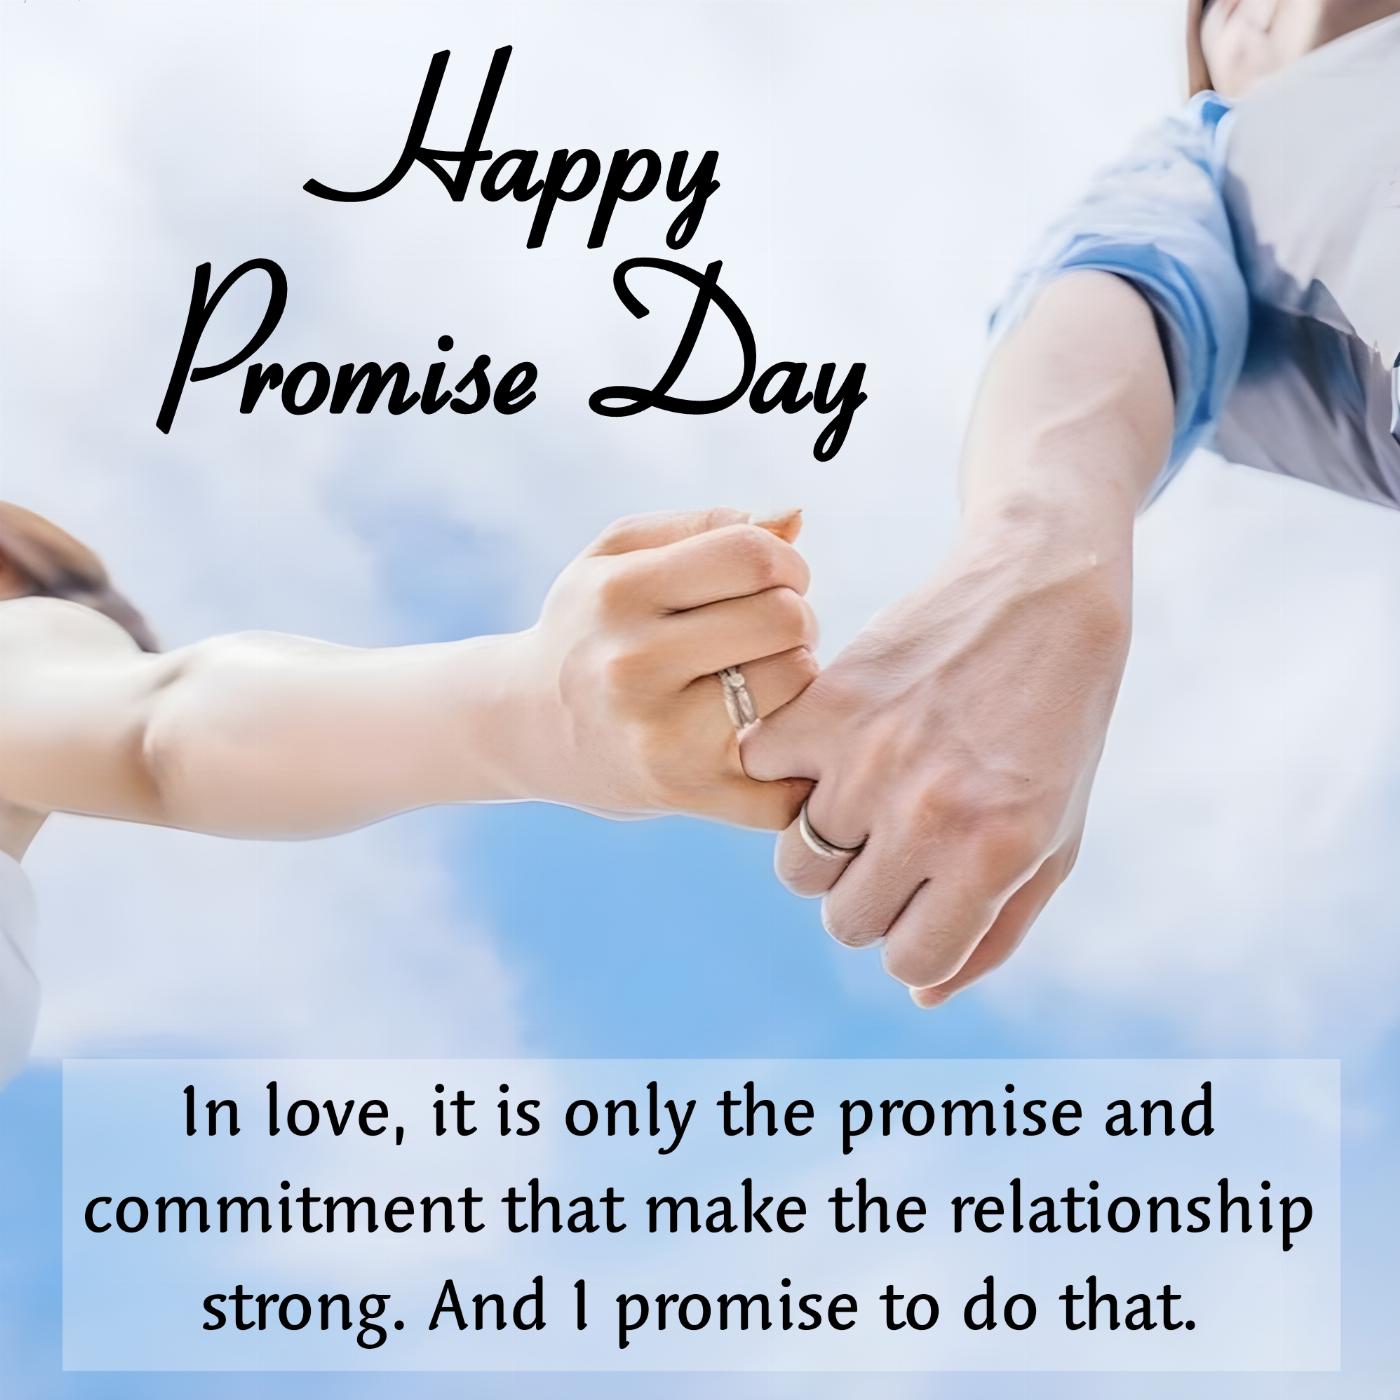 In love it is only the promise and commitment that make the relationship strong